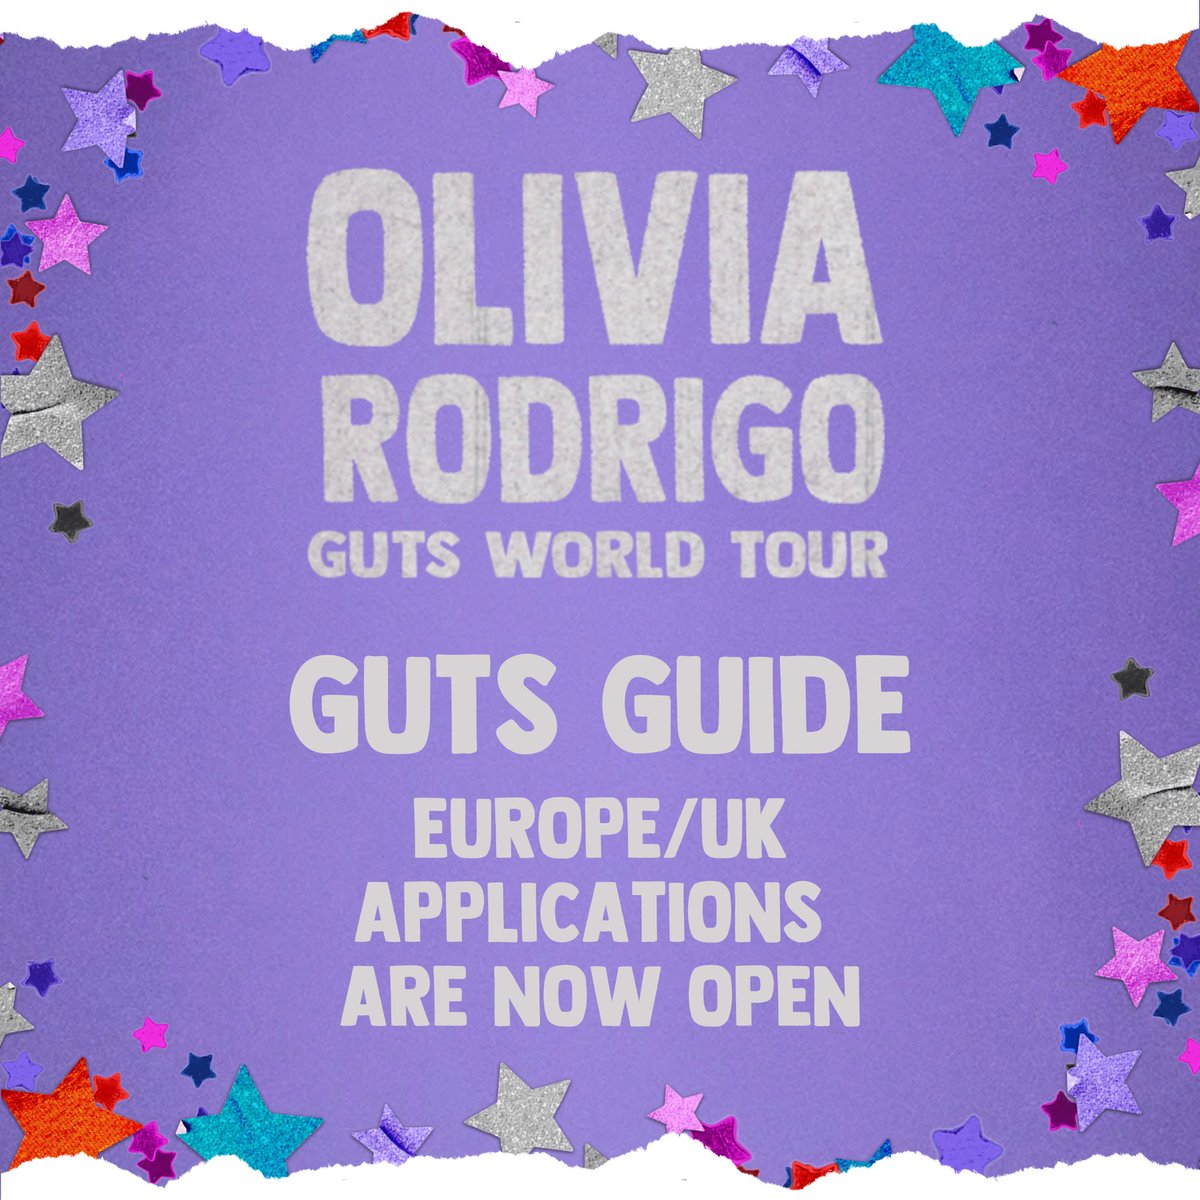 drumroll please…. 🥁🥁🥁 GUTS guide applications are now open for all europe/uk #GUTSWorldTour shows!!! please fill out the form below & carefully read the description for more information 💜 (applications for the rest of the tour will be available at a later date)…